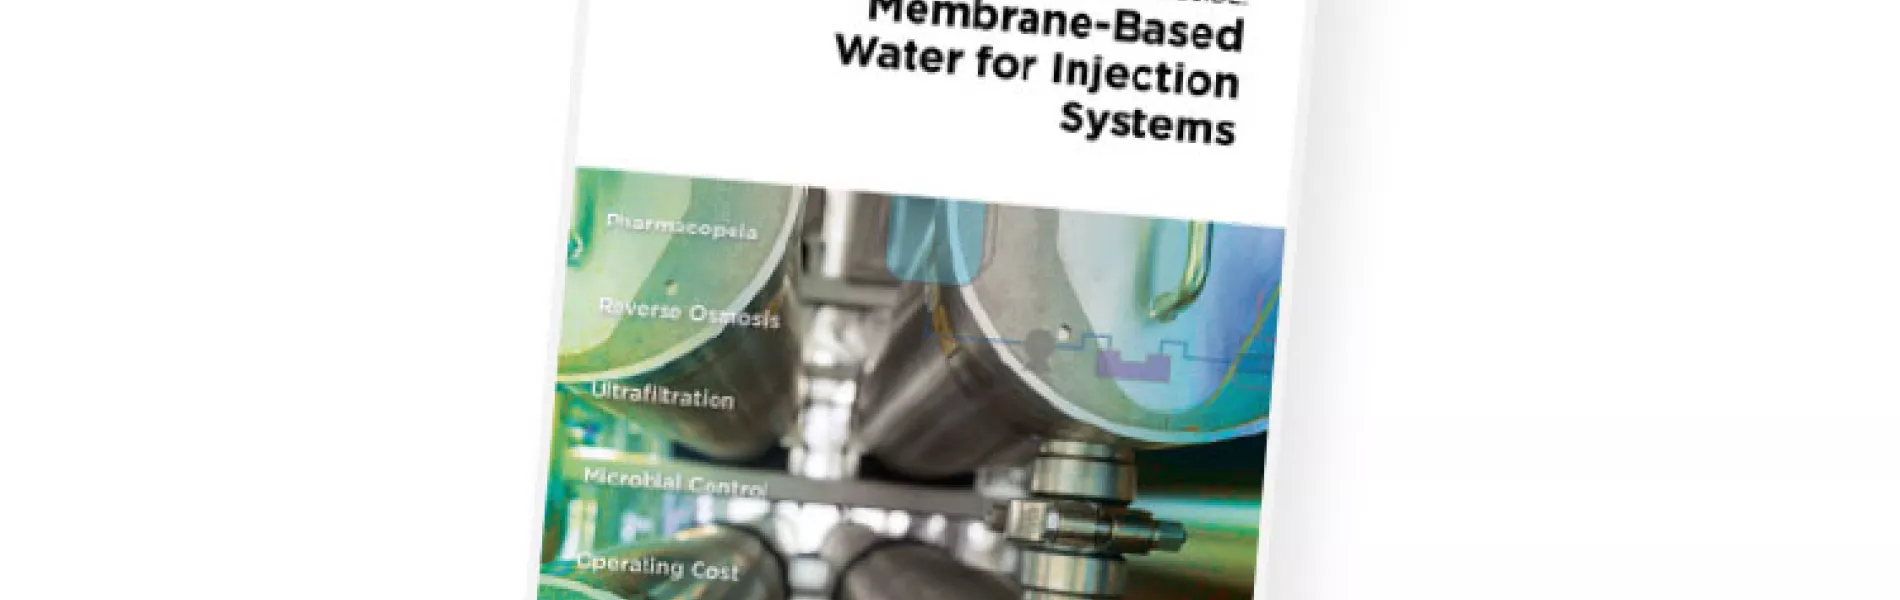 New GPG Explores Membrane-Based WFI Systems